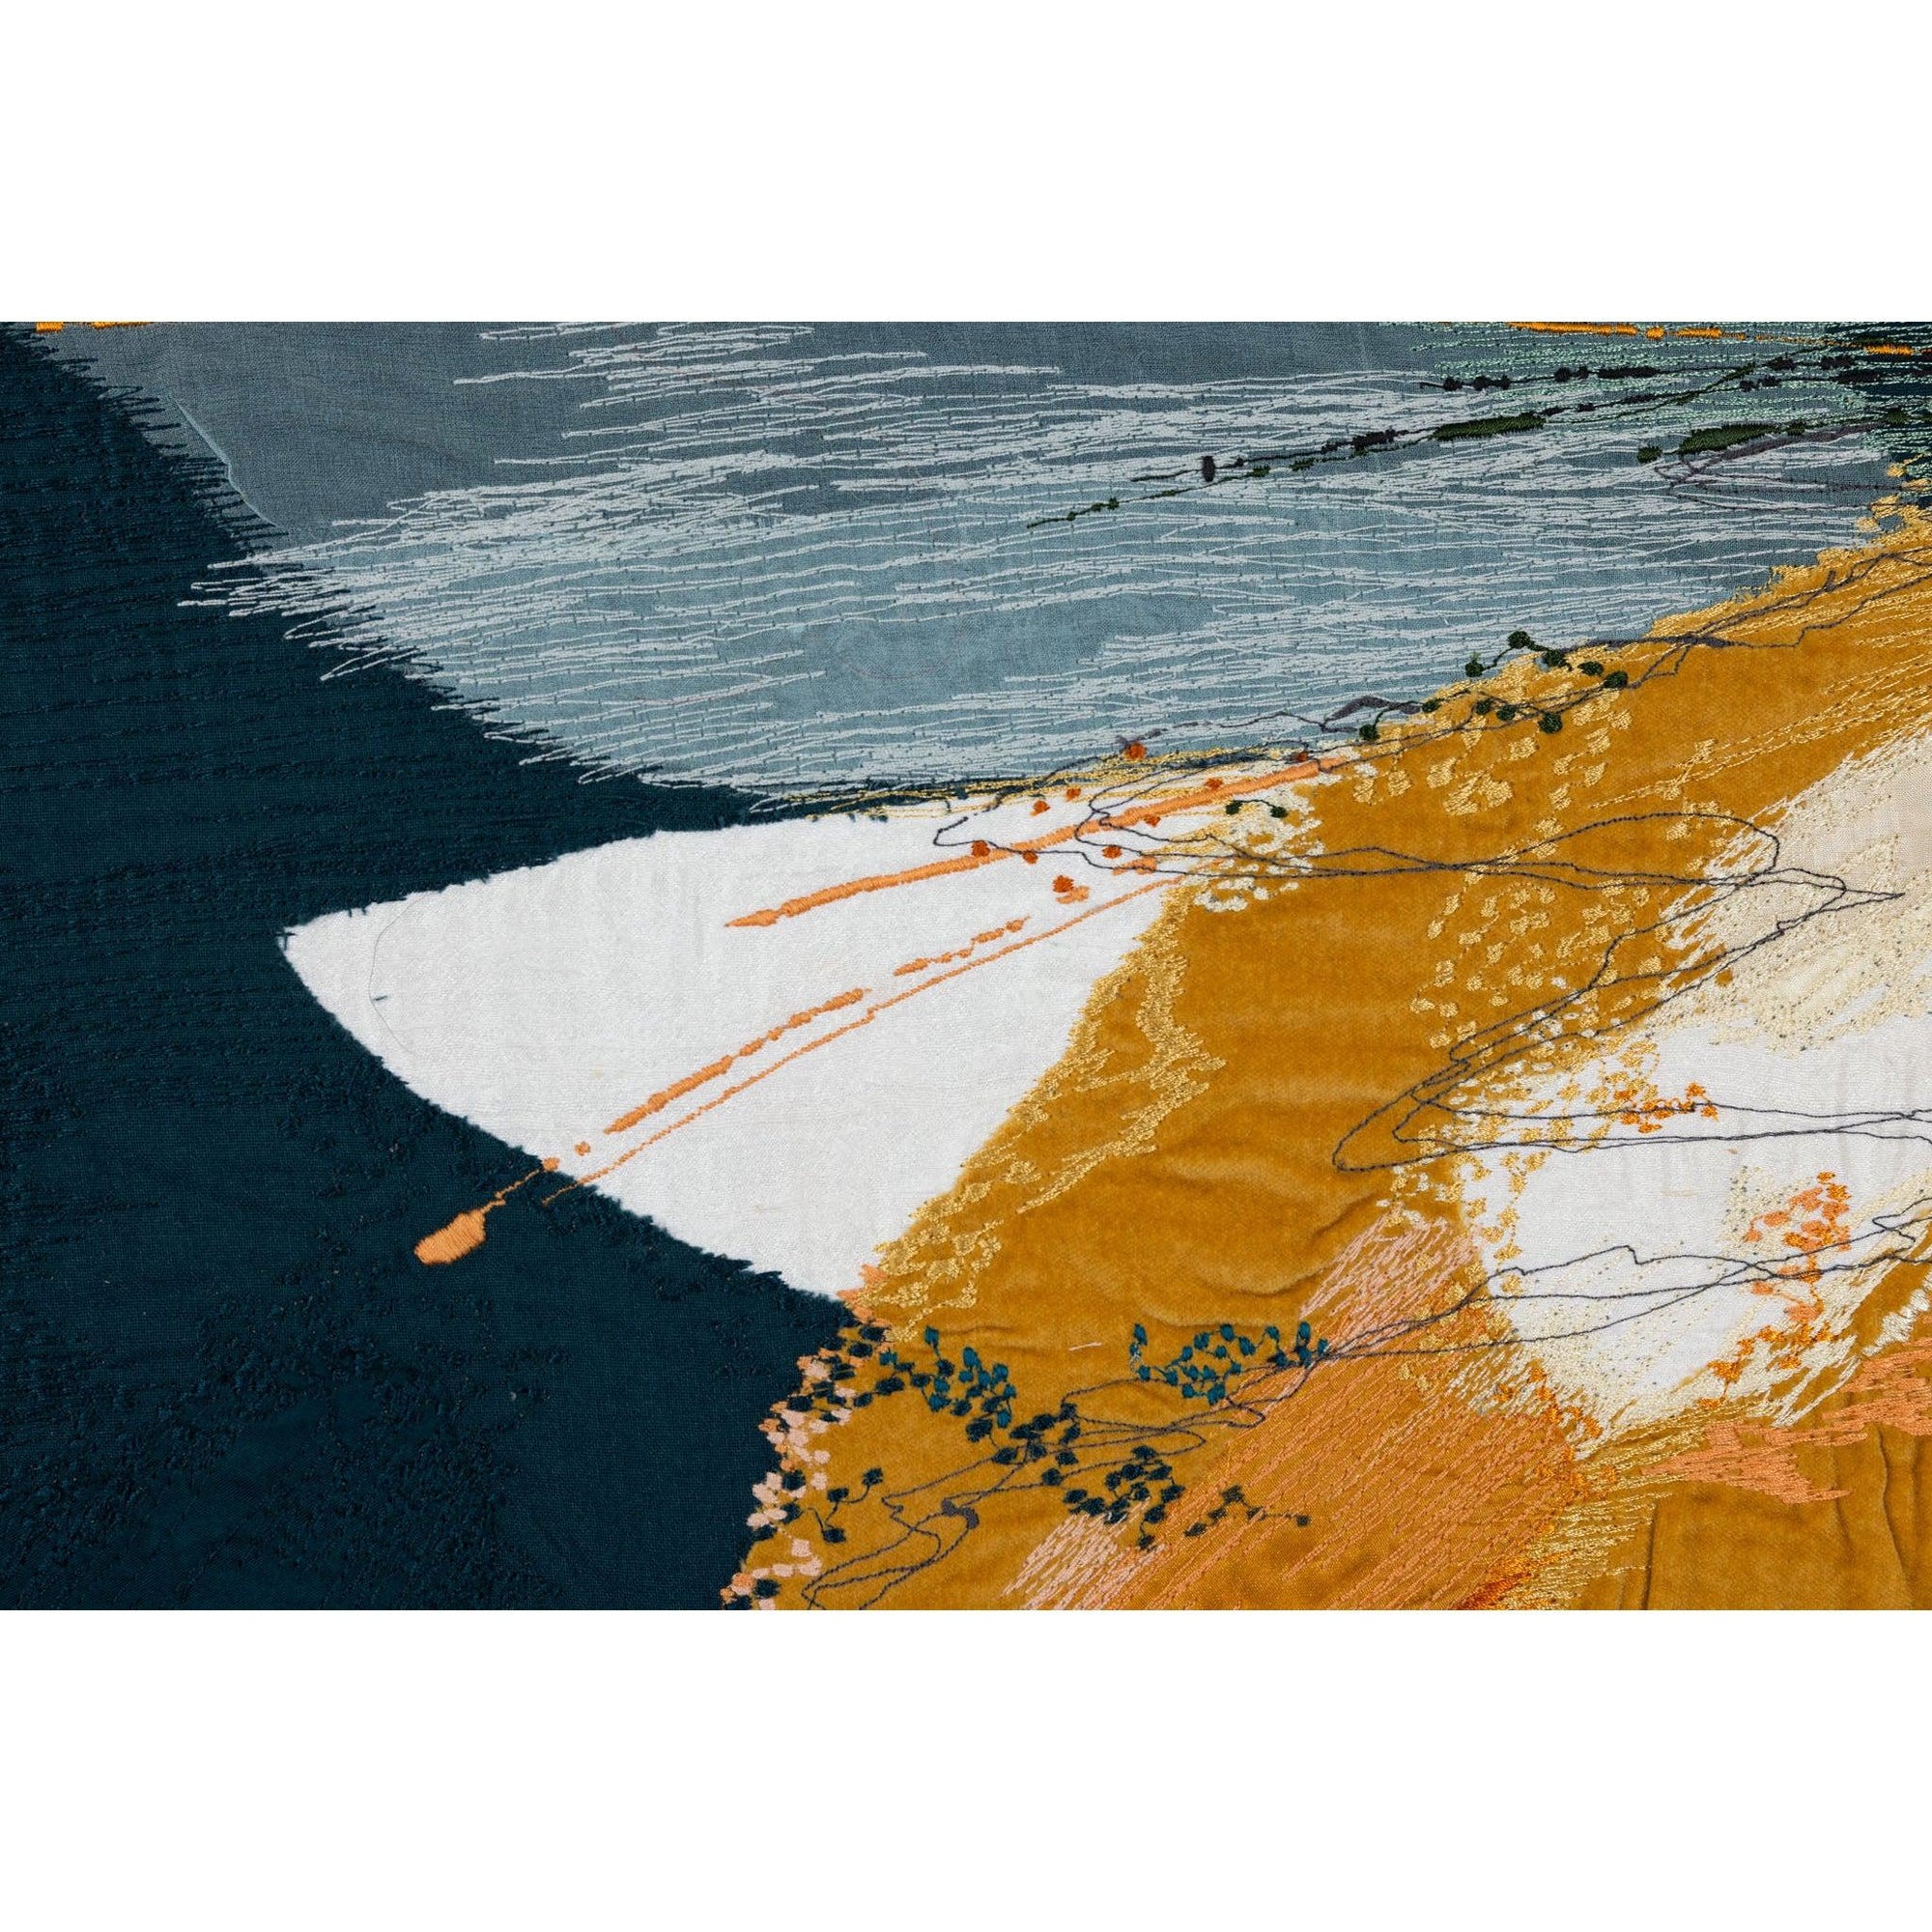 'Daymer' dynamic stitched textiles original by Sarah Pooley, available at Padstow Gallery, Cornwall.